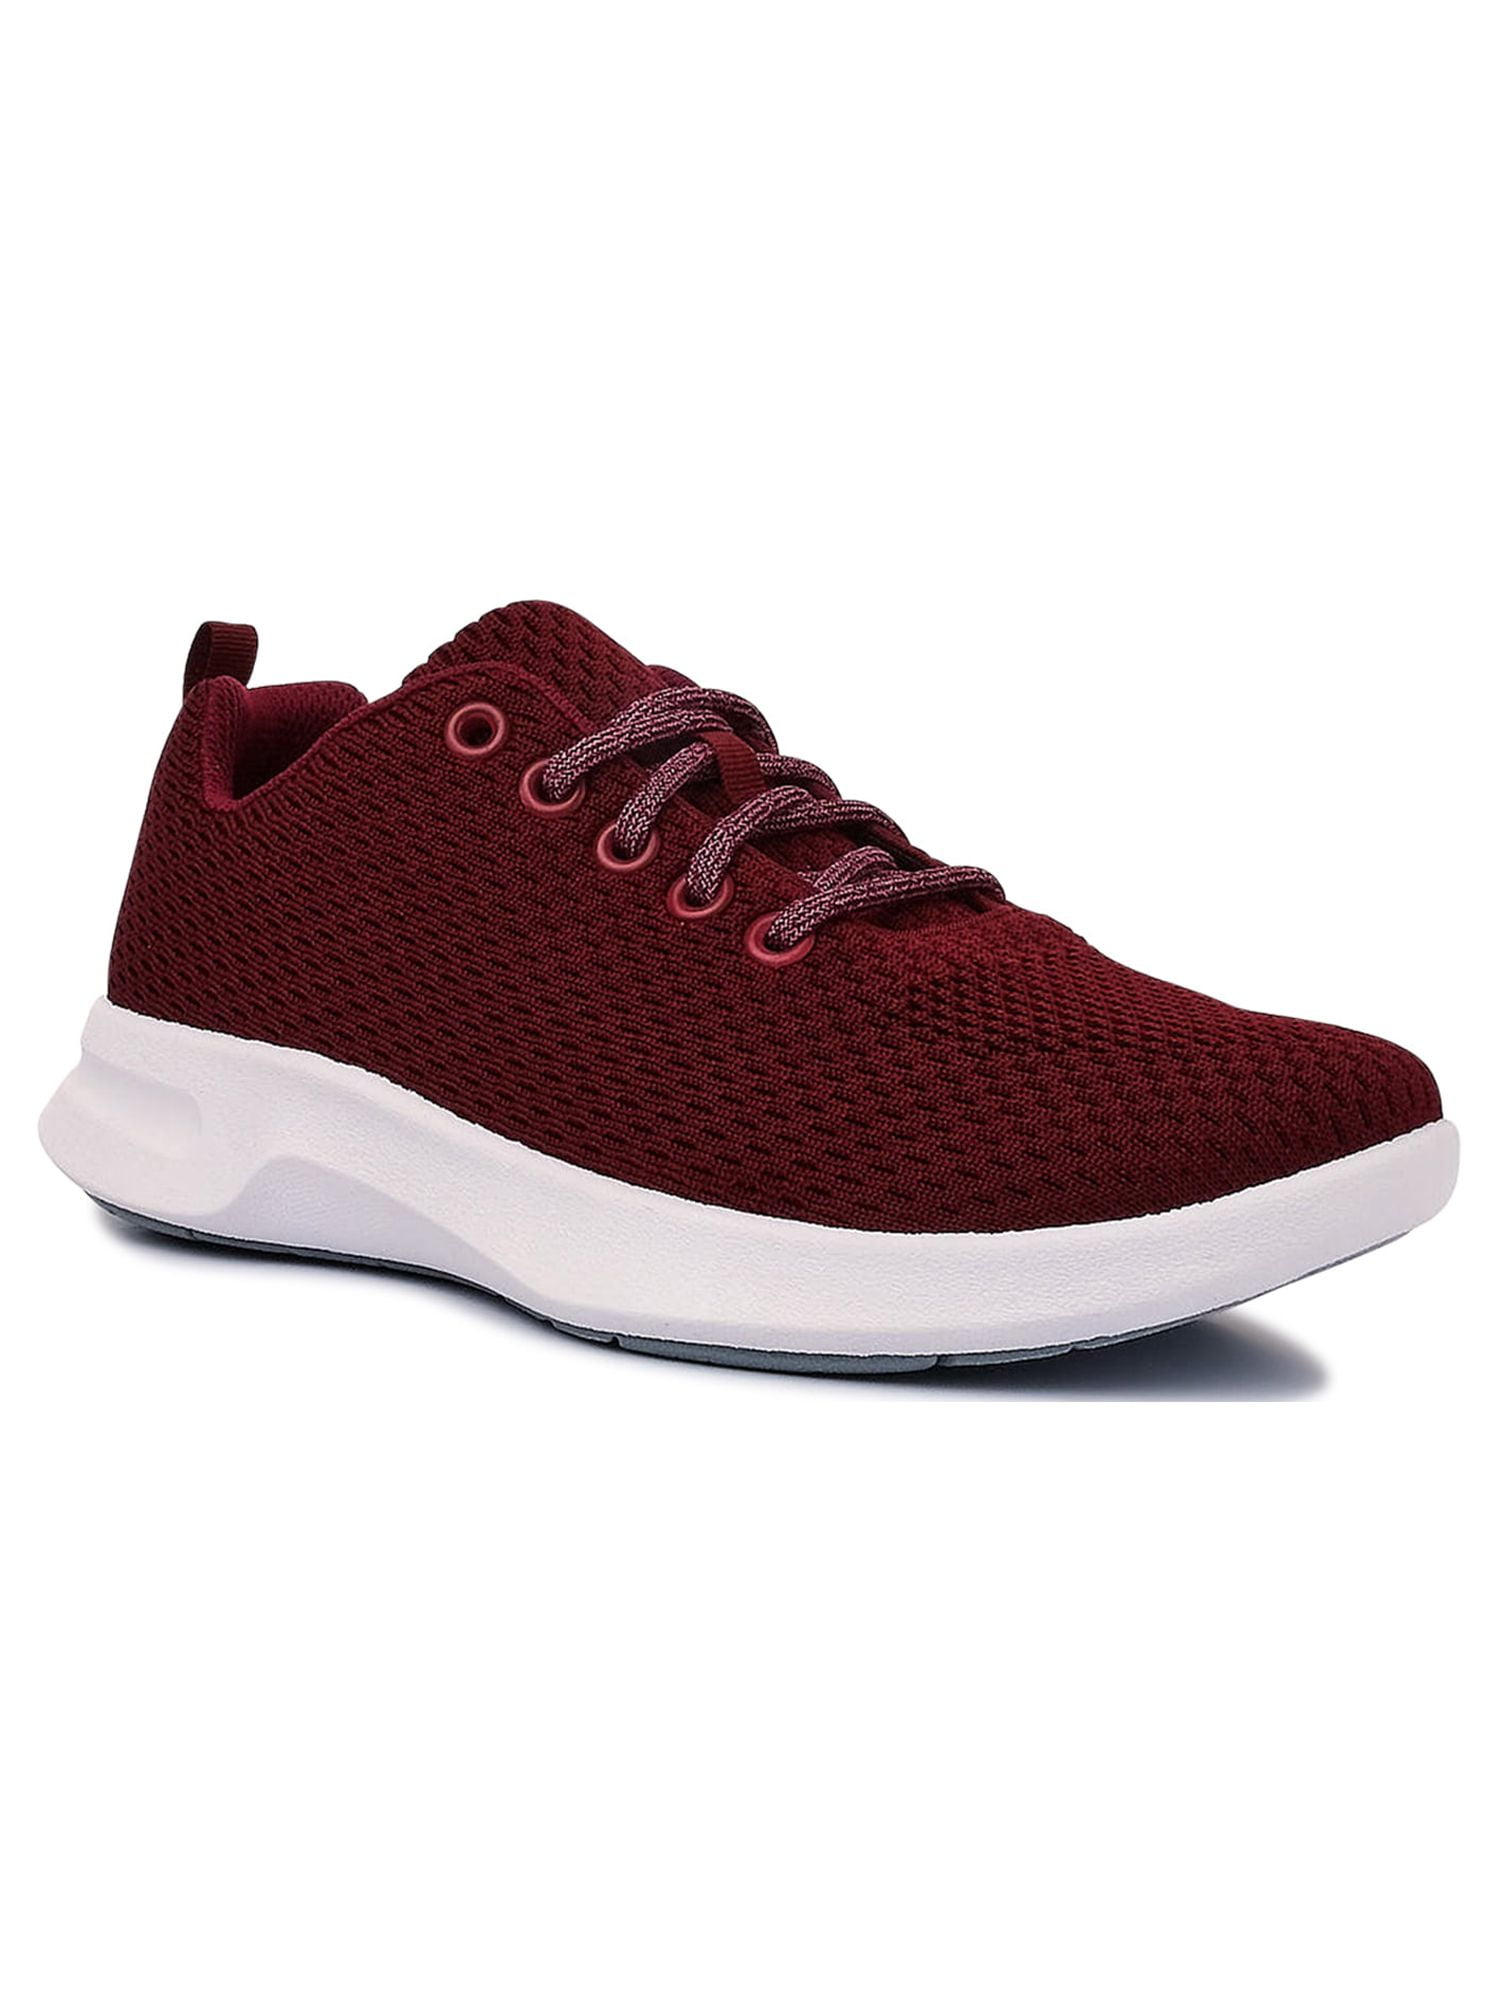 Athletic Works Women's Shoes Only $9 on Walmart.com (Lots of